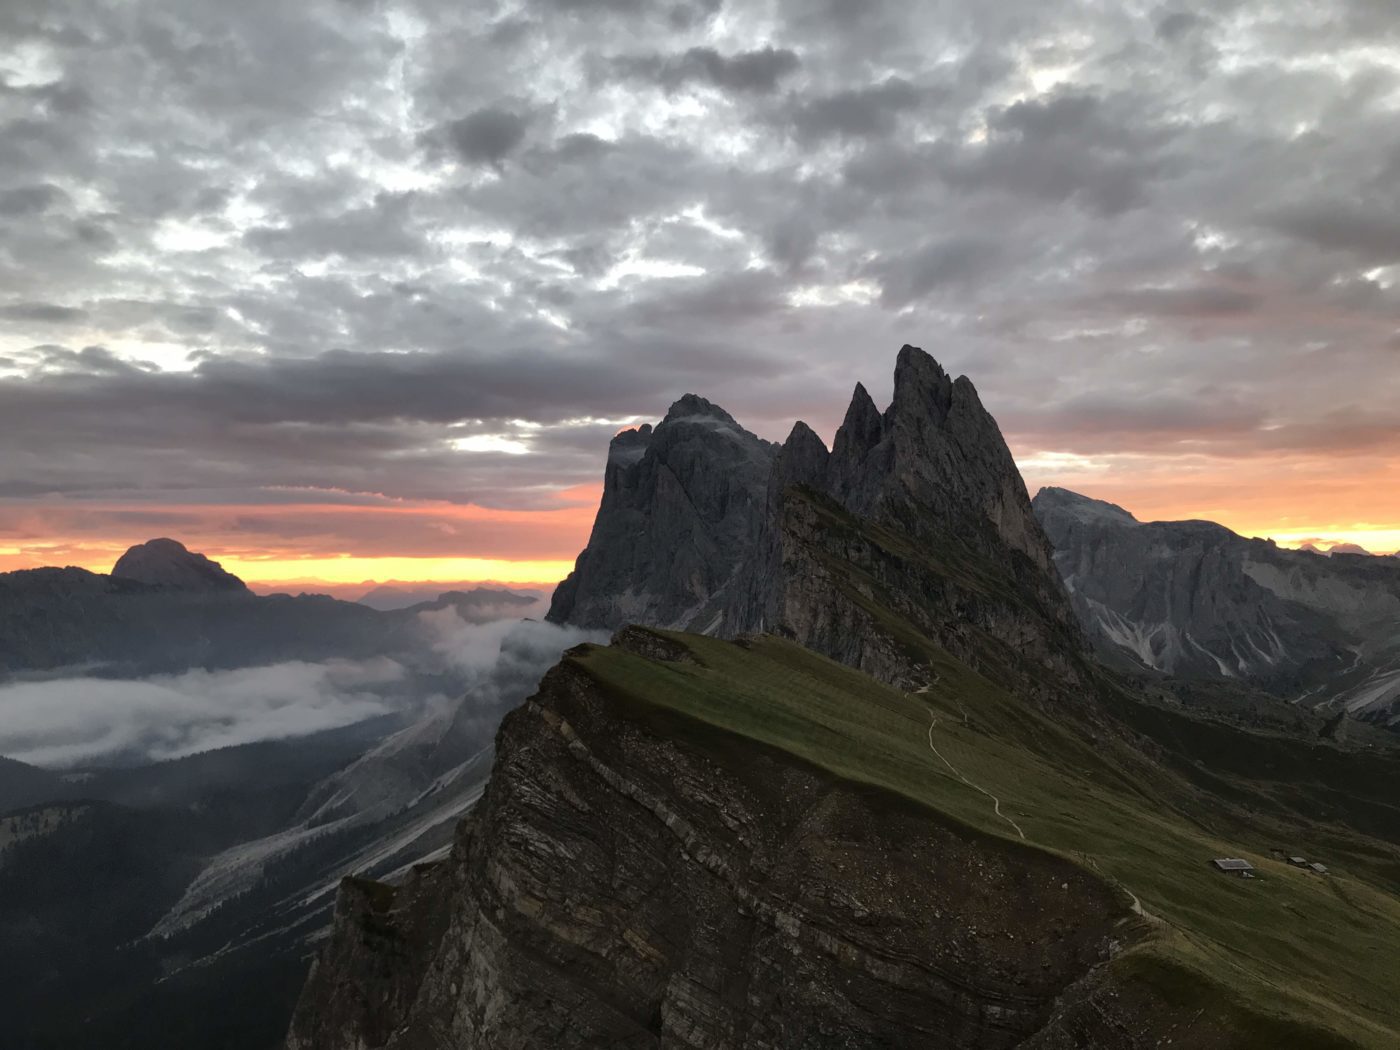 Seceda 2500m, famous Instagram location in South Tyrol